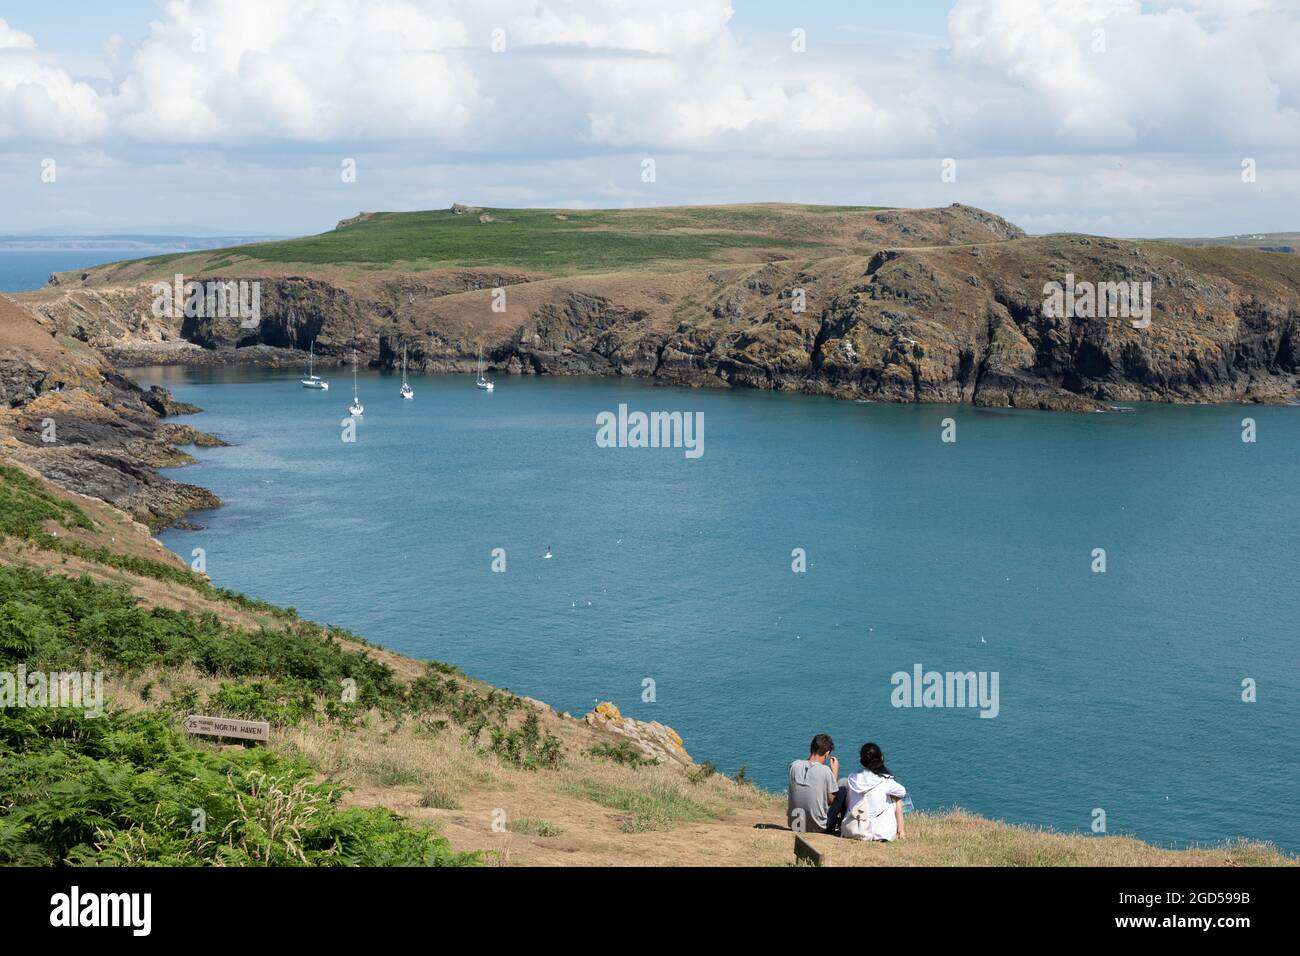 A view of Skomer Island, run by the Wildlife Trust of South and West Wales, home to puffins and many other birds and wildlife. Stock Photo